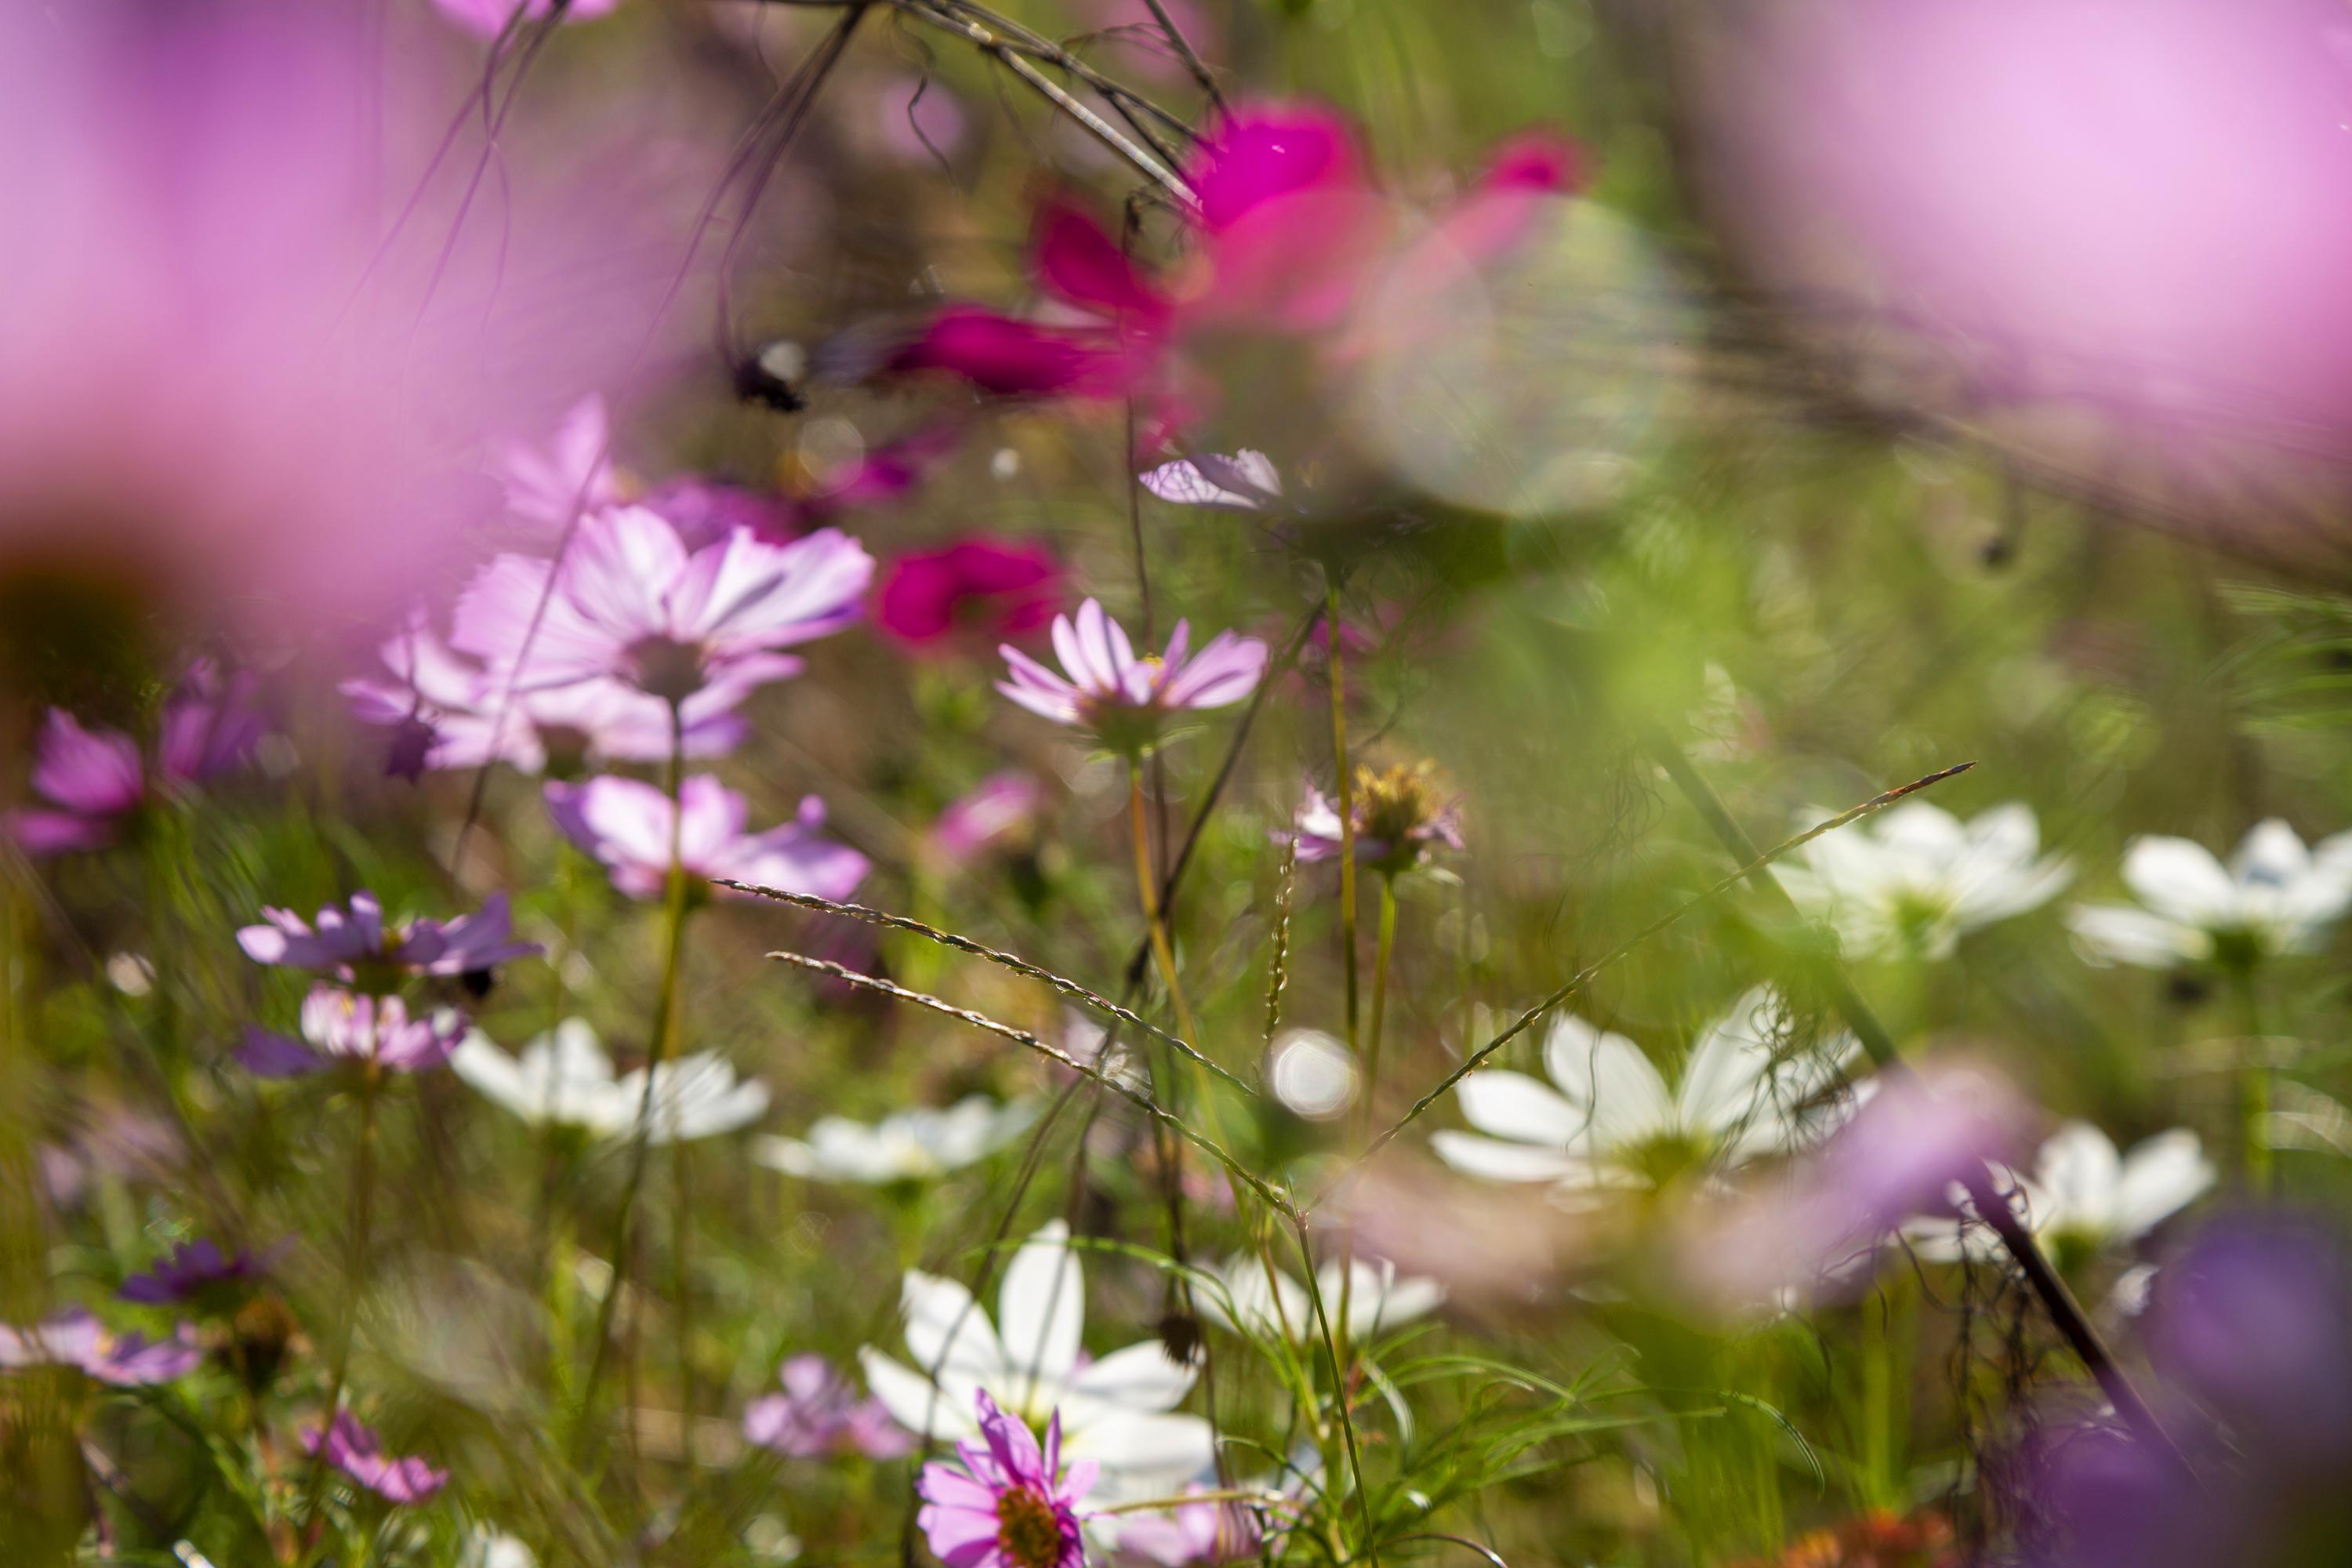 Thad Lee Abstract Photograph - 'Anniversary Wildflowers' - abstract landscape photography - floral - colorful